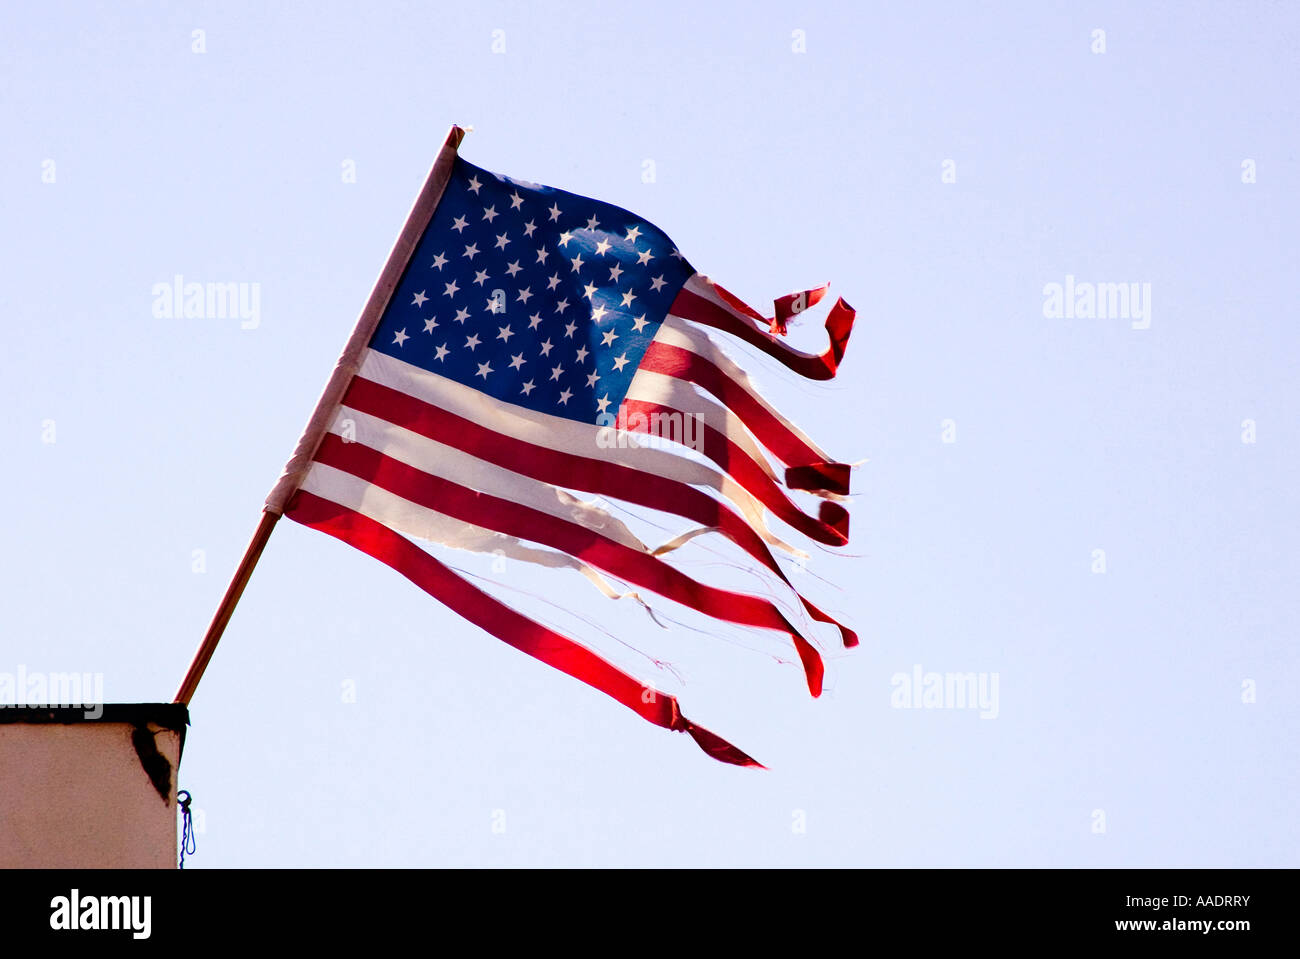 Tattered and torn American flag blows in strong wind Stock Photo